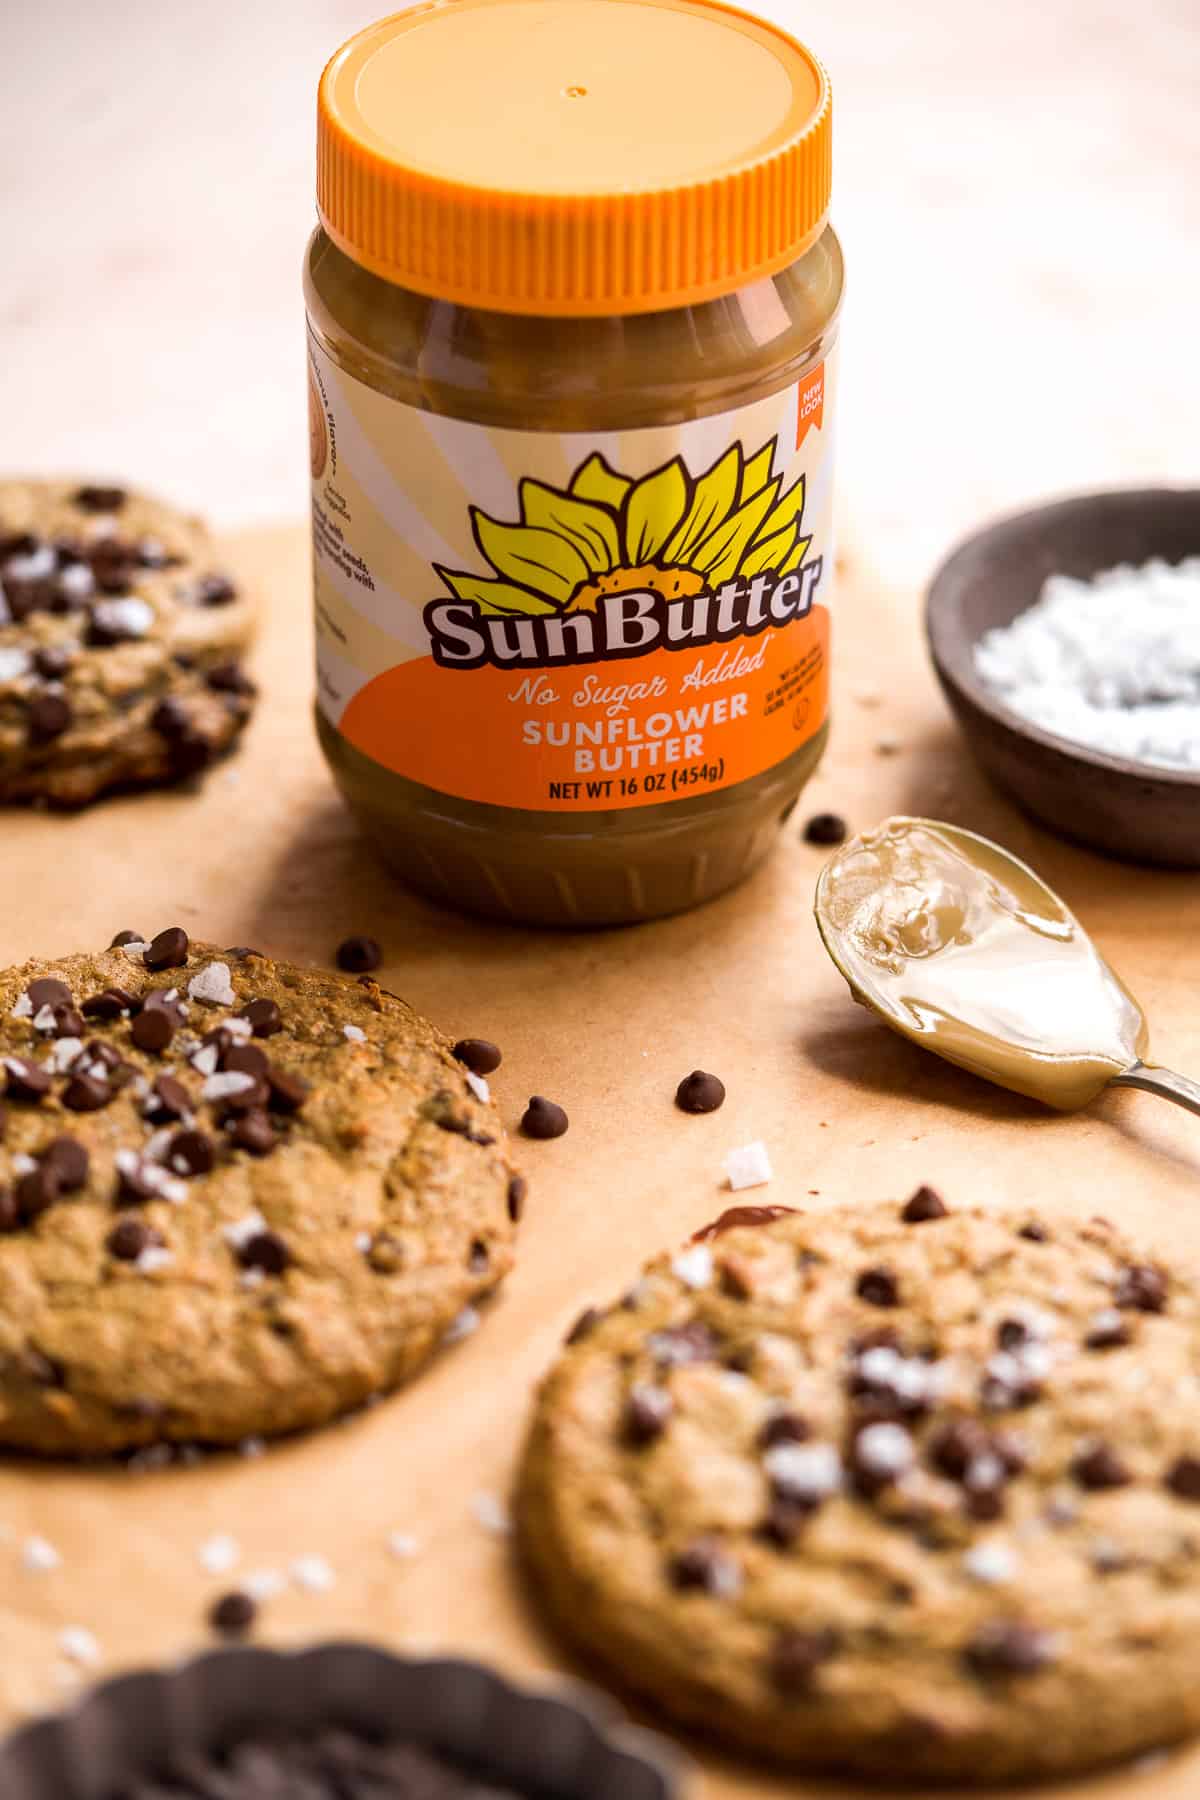 Jar of sunflower butter with orange lid on parchment paper with cookies on the surface.